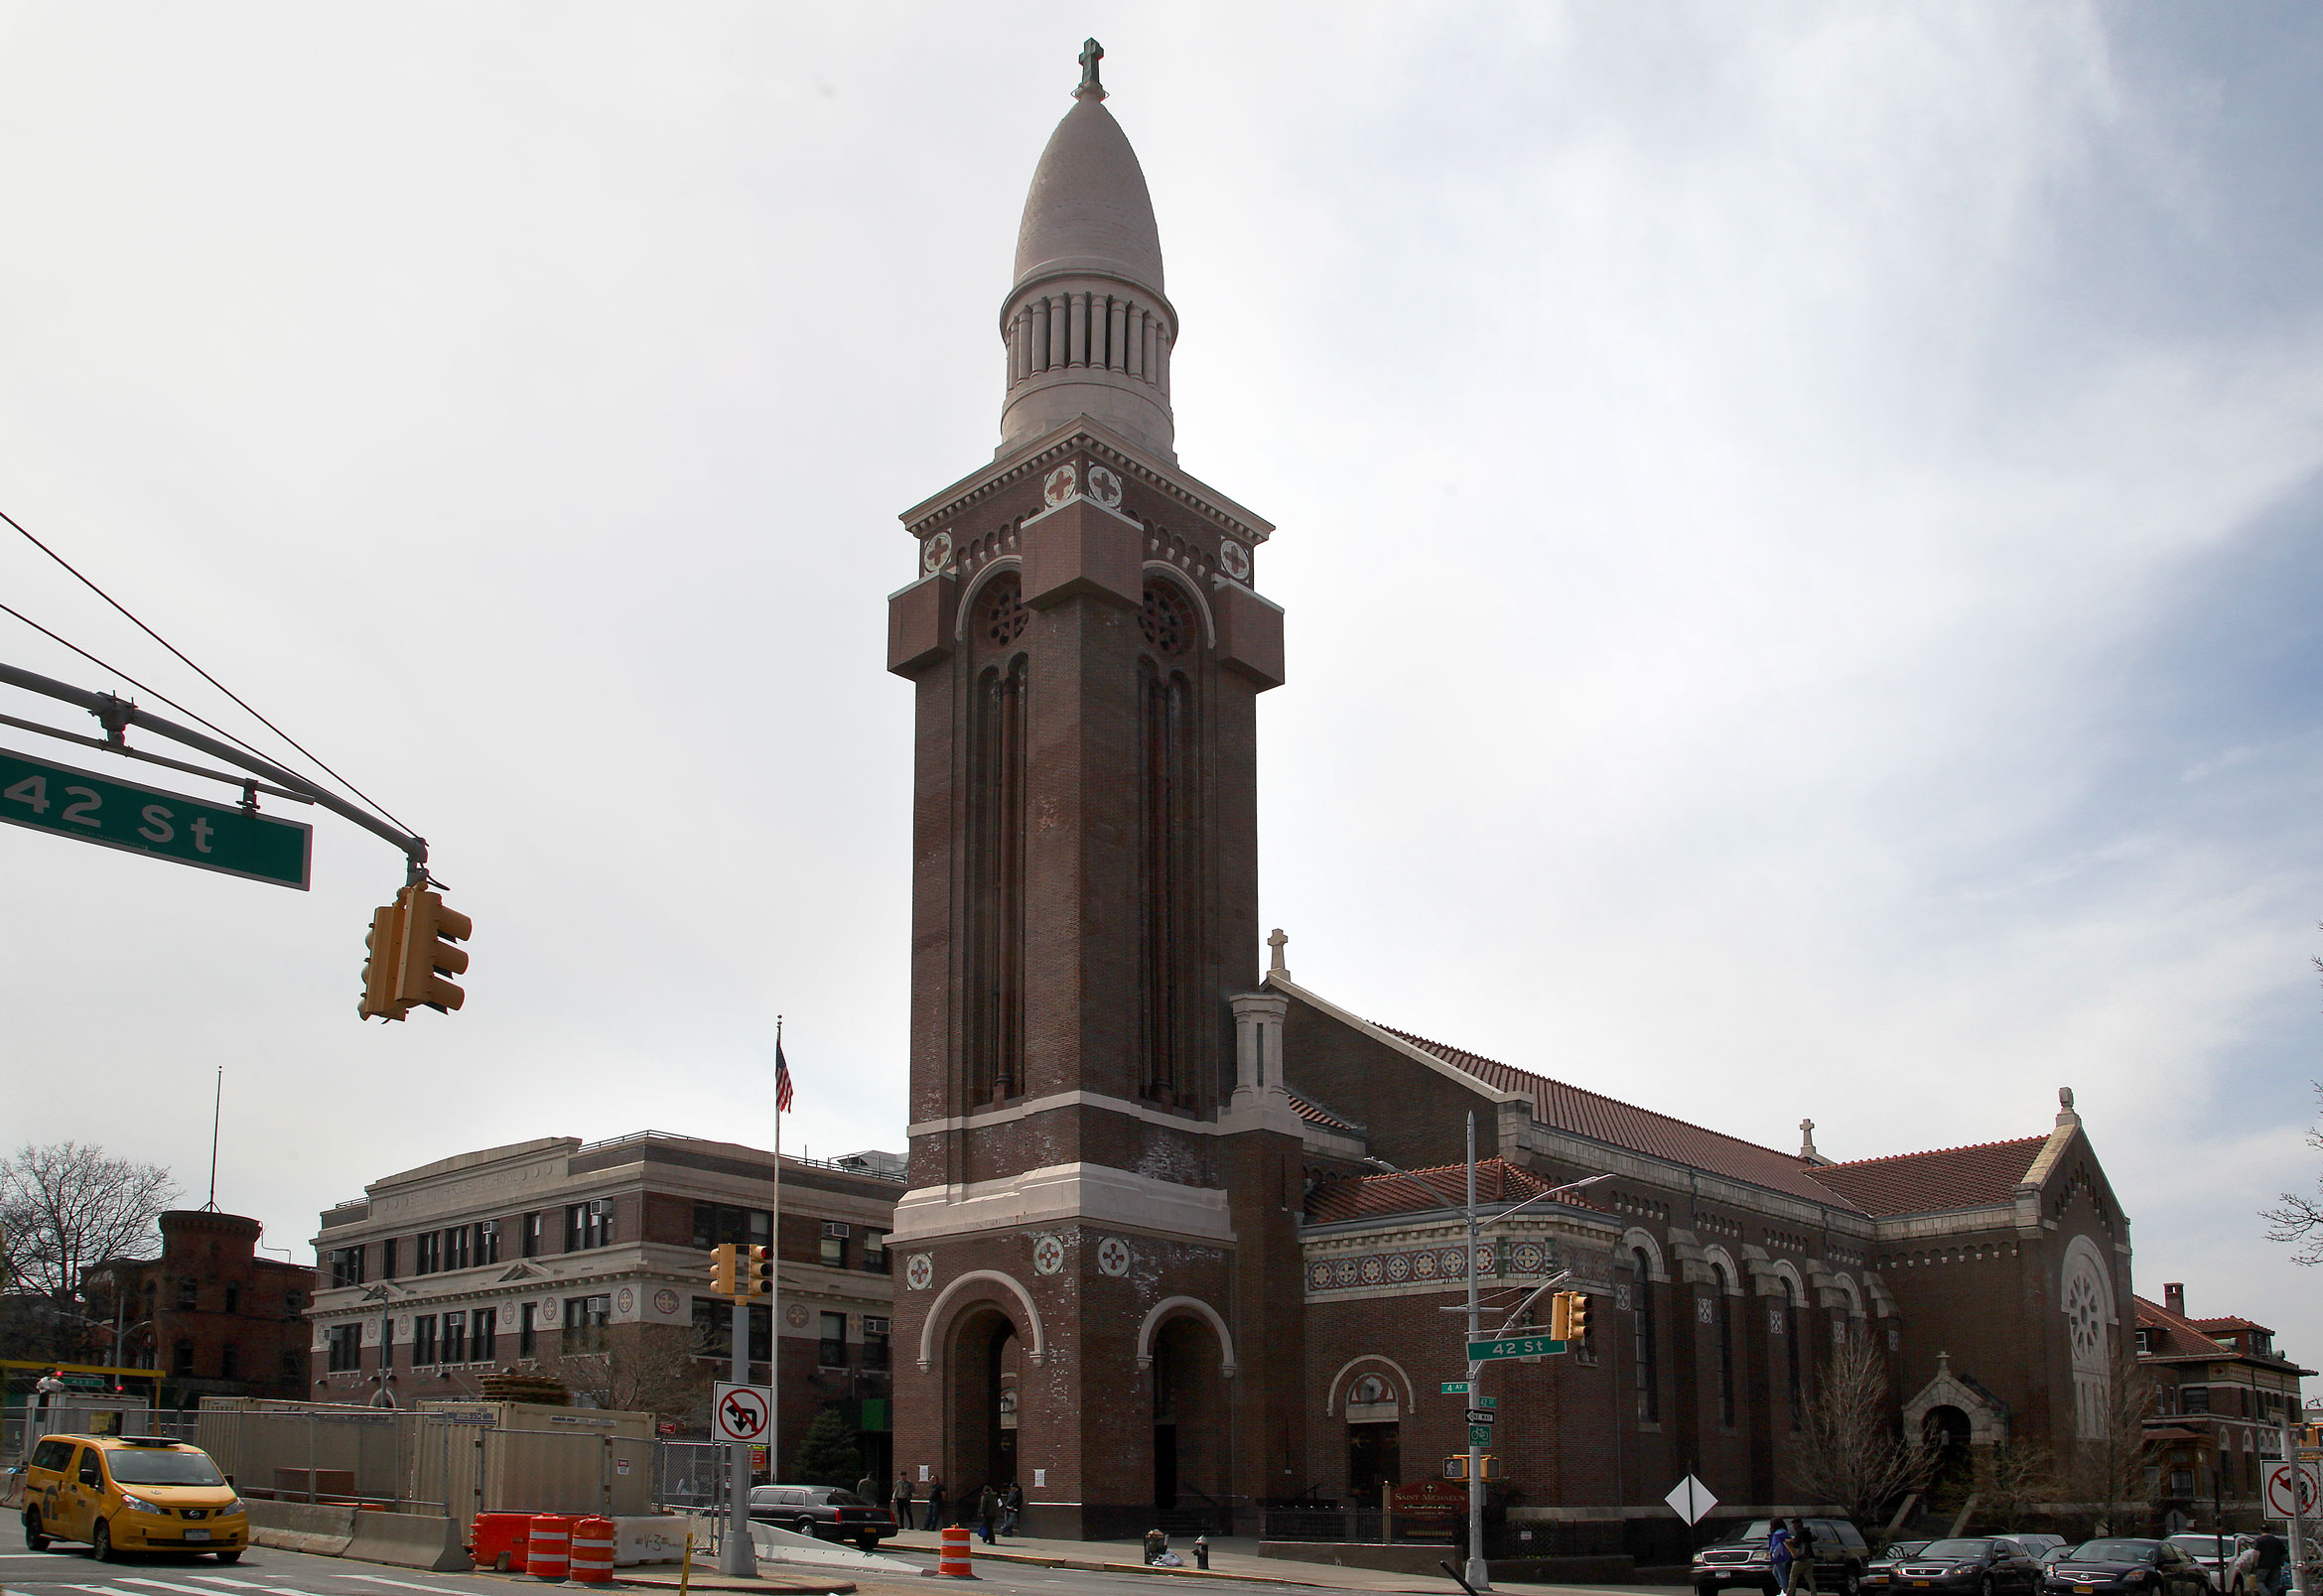 St. Michael’s Church, on Fourth Avenue in the heart of Sunset Park. The community solar project could expand to rooftops across the neighborhood. Photo by Amy Howden-Chapman